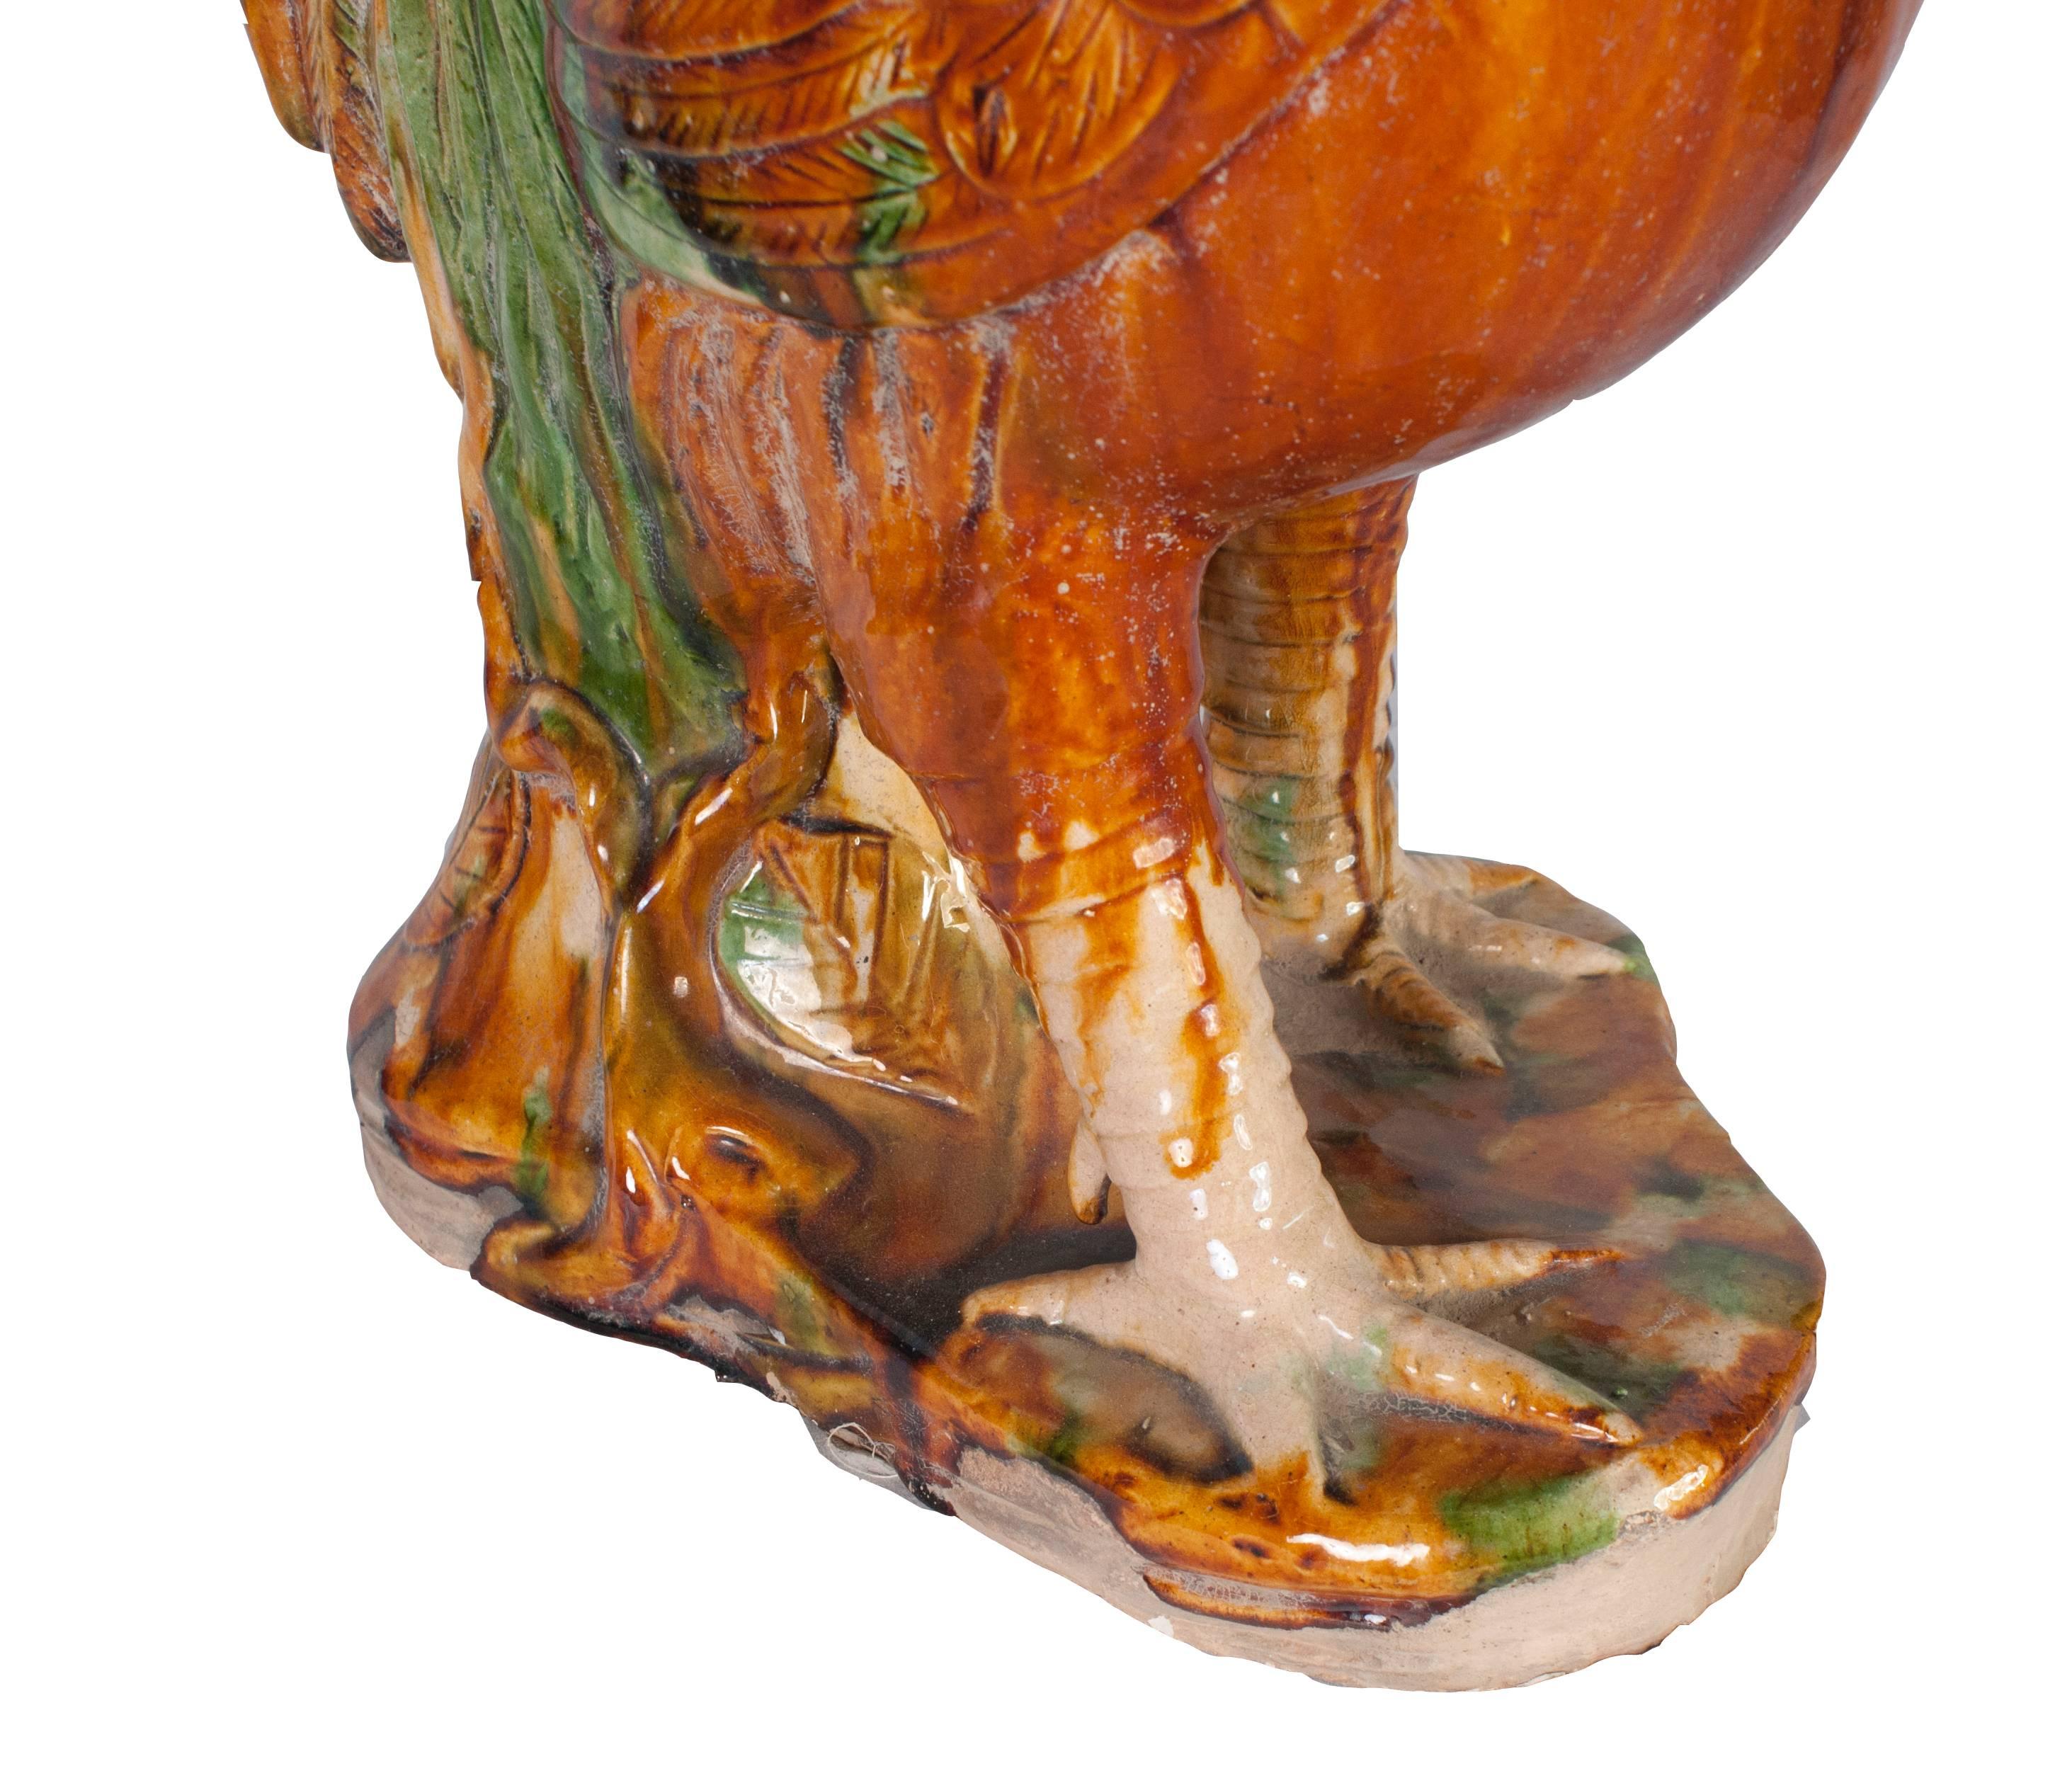 A painted terra cotta rooster.